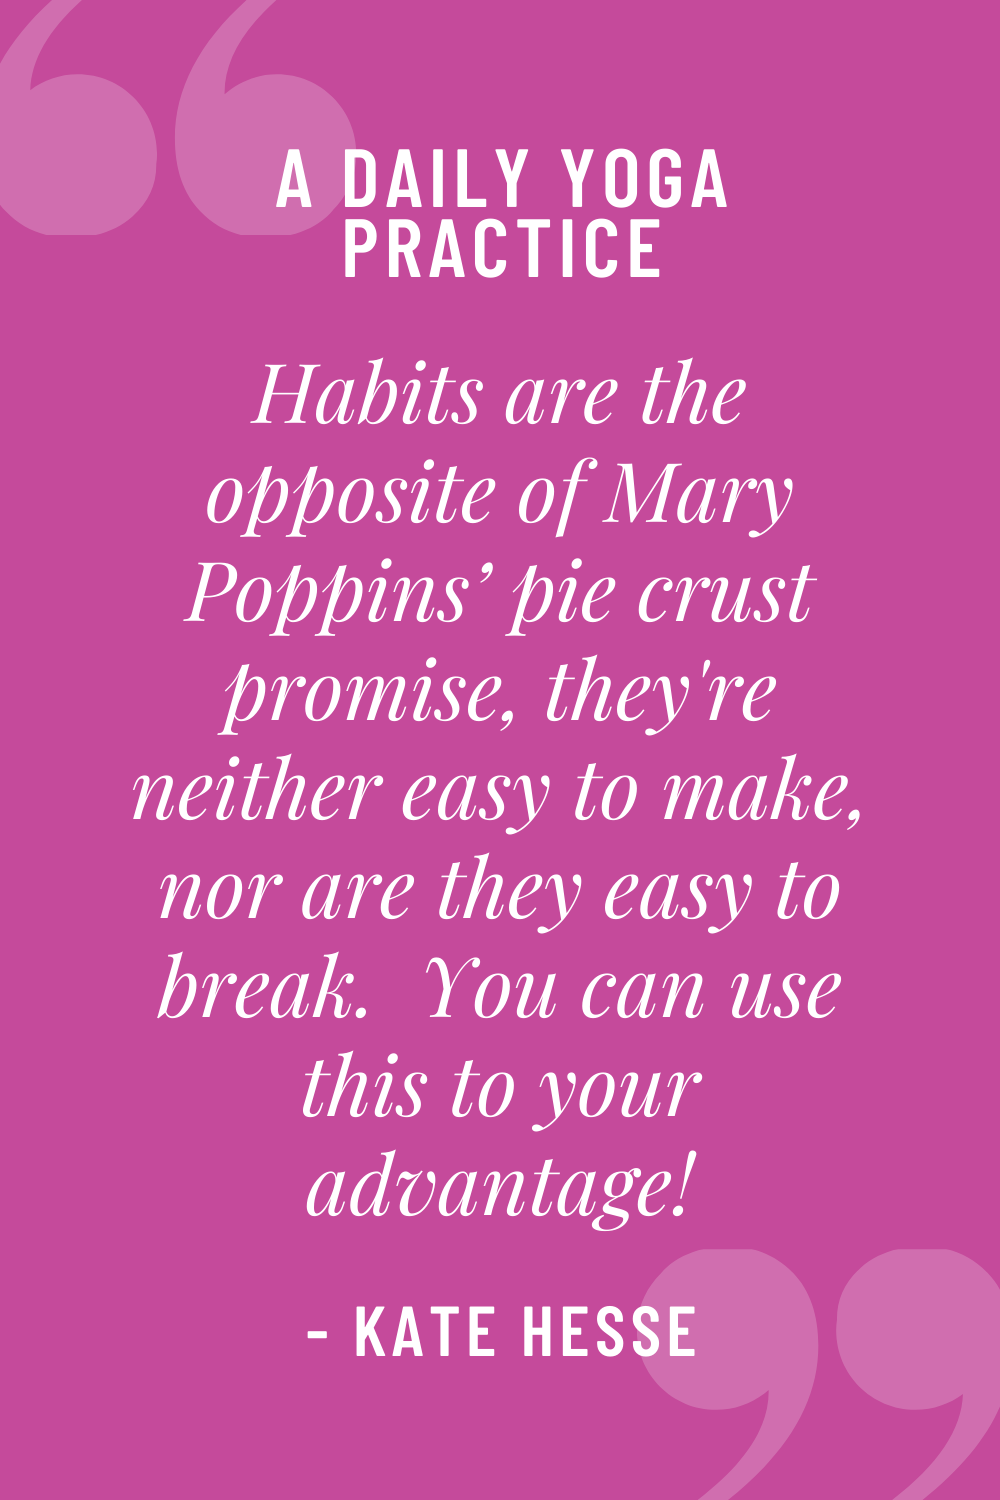 Habits are the opposite of Mary Poppins' pie crust promise, they're neither easy to make, nor are they easy to break. You can use this to your advantage!